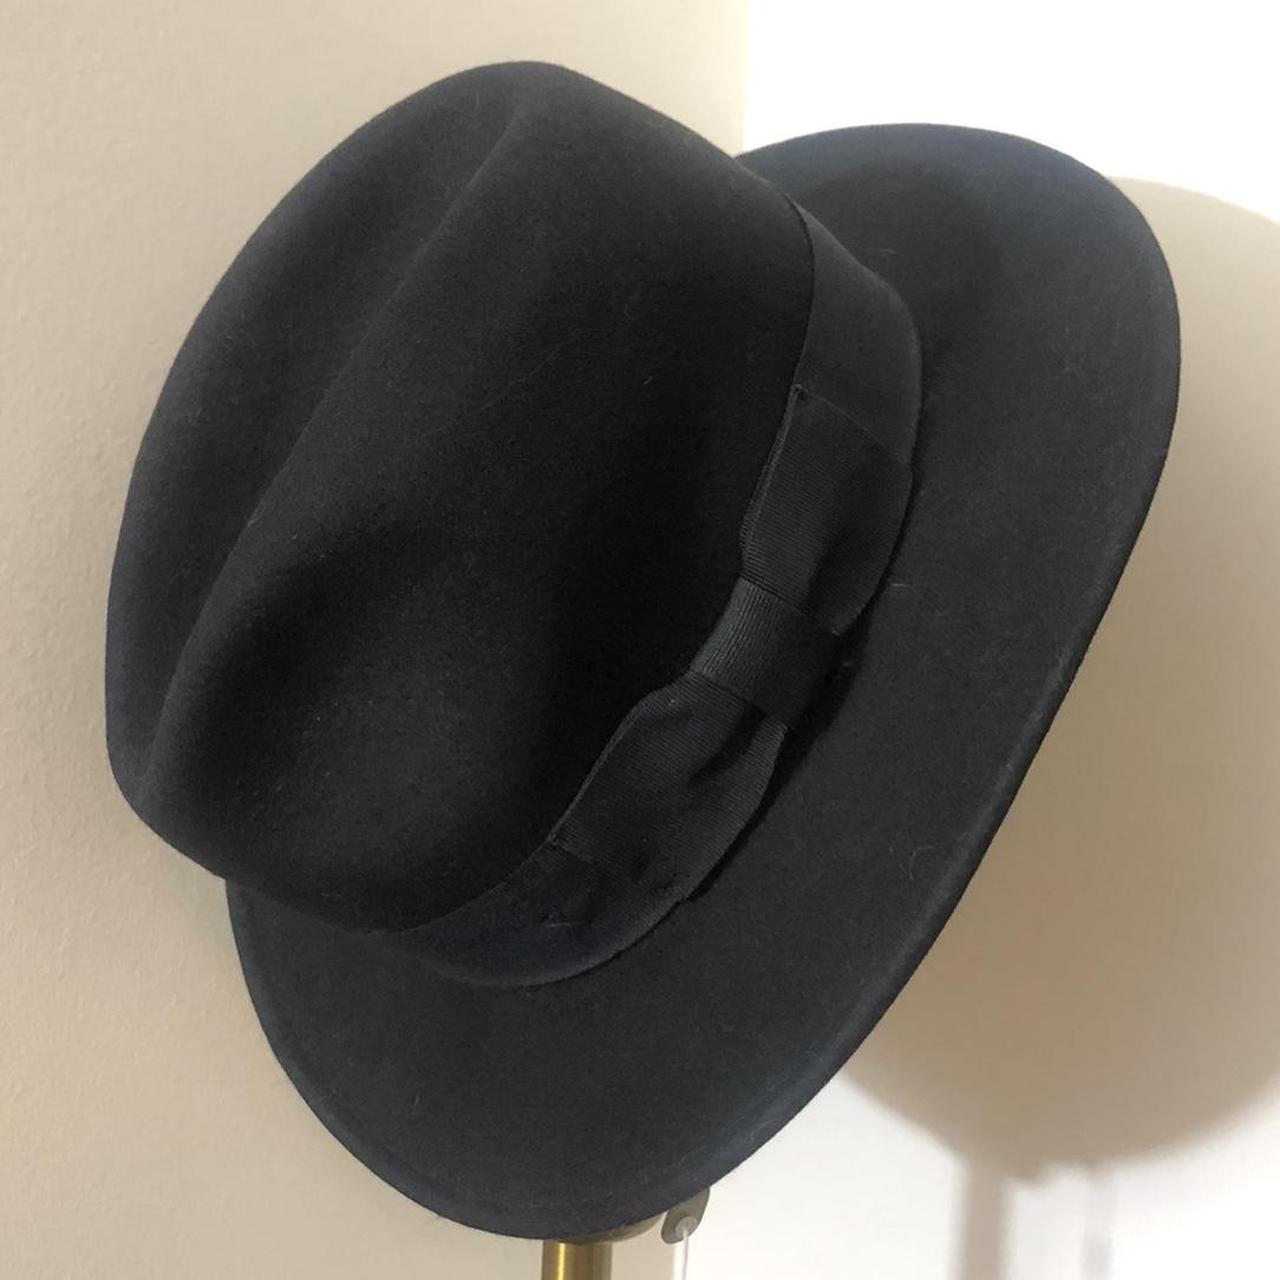 Product Image 2 - Black Top Hat 100% Wool
Has